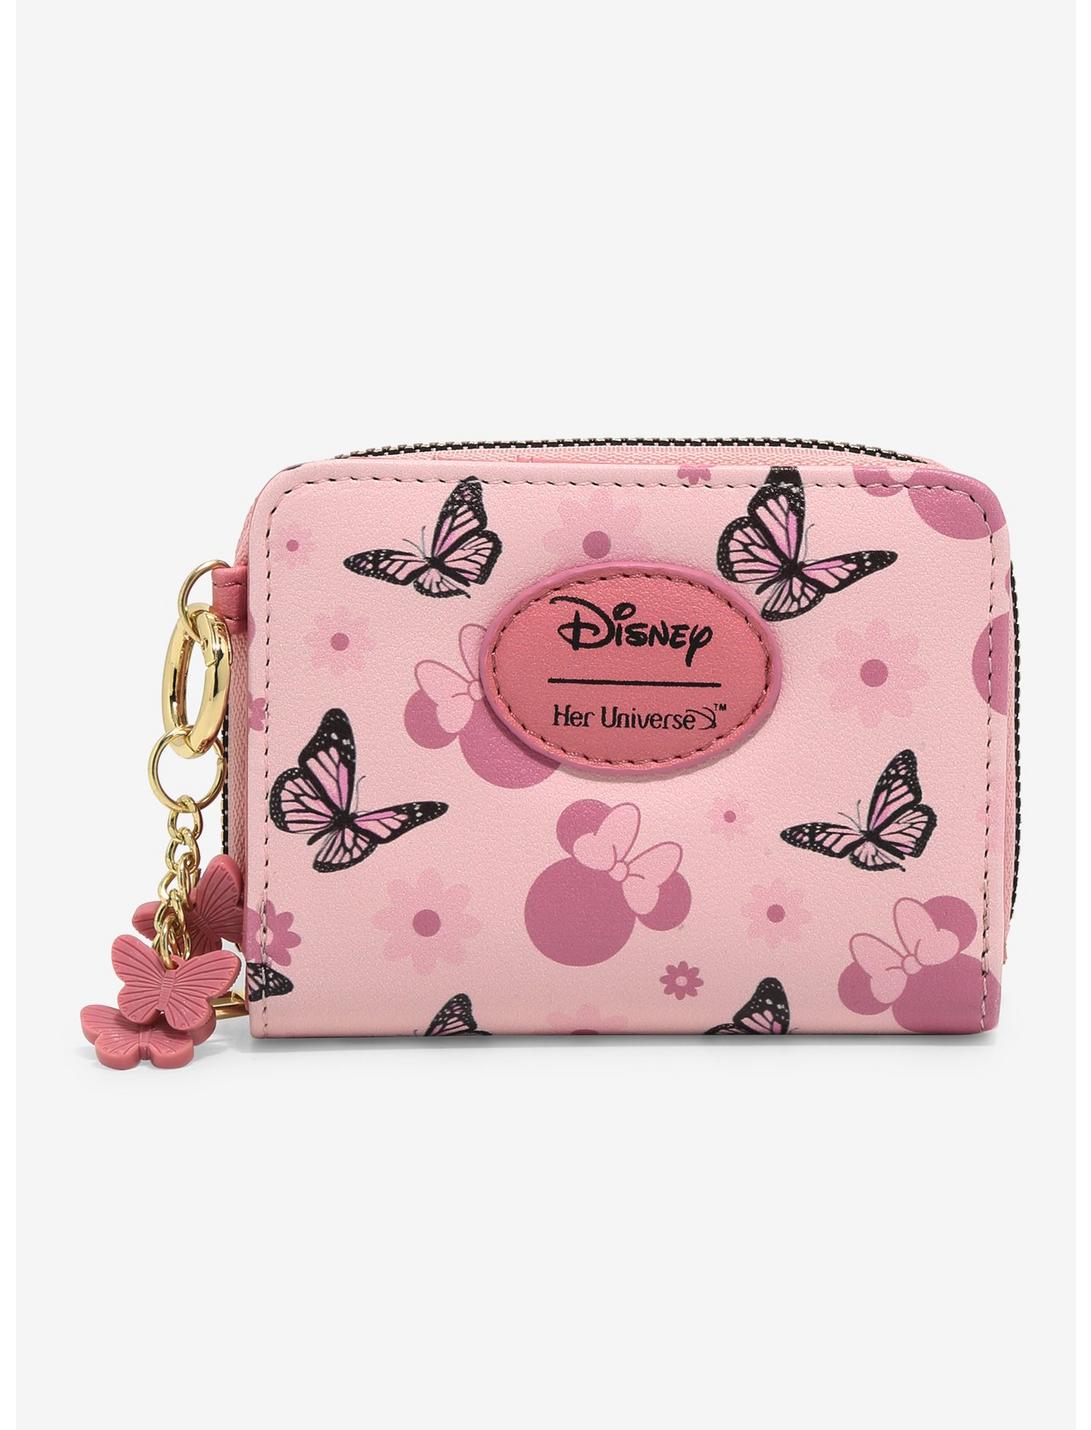 Her Universe Disney Minnie Mouse Butterfly Mini Zipper Wallet, , hi-res